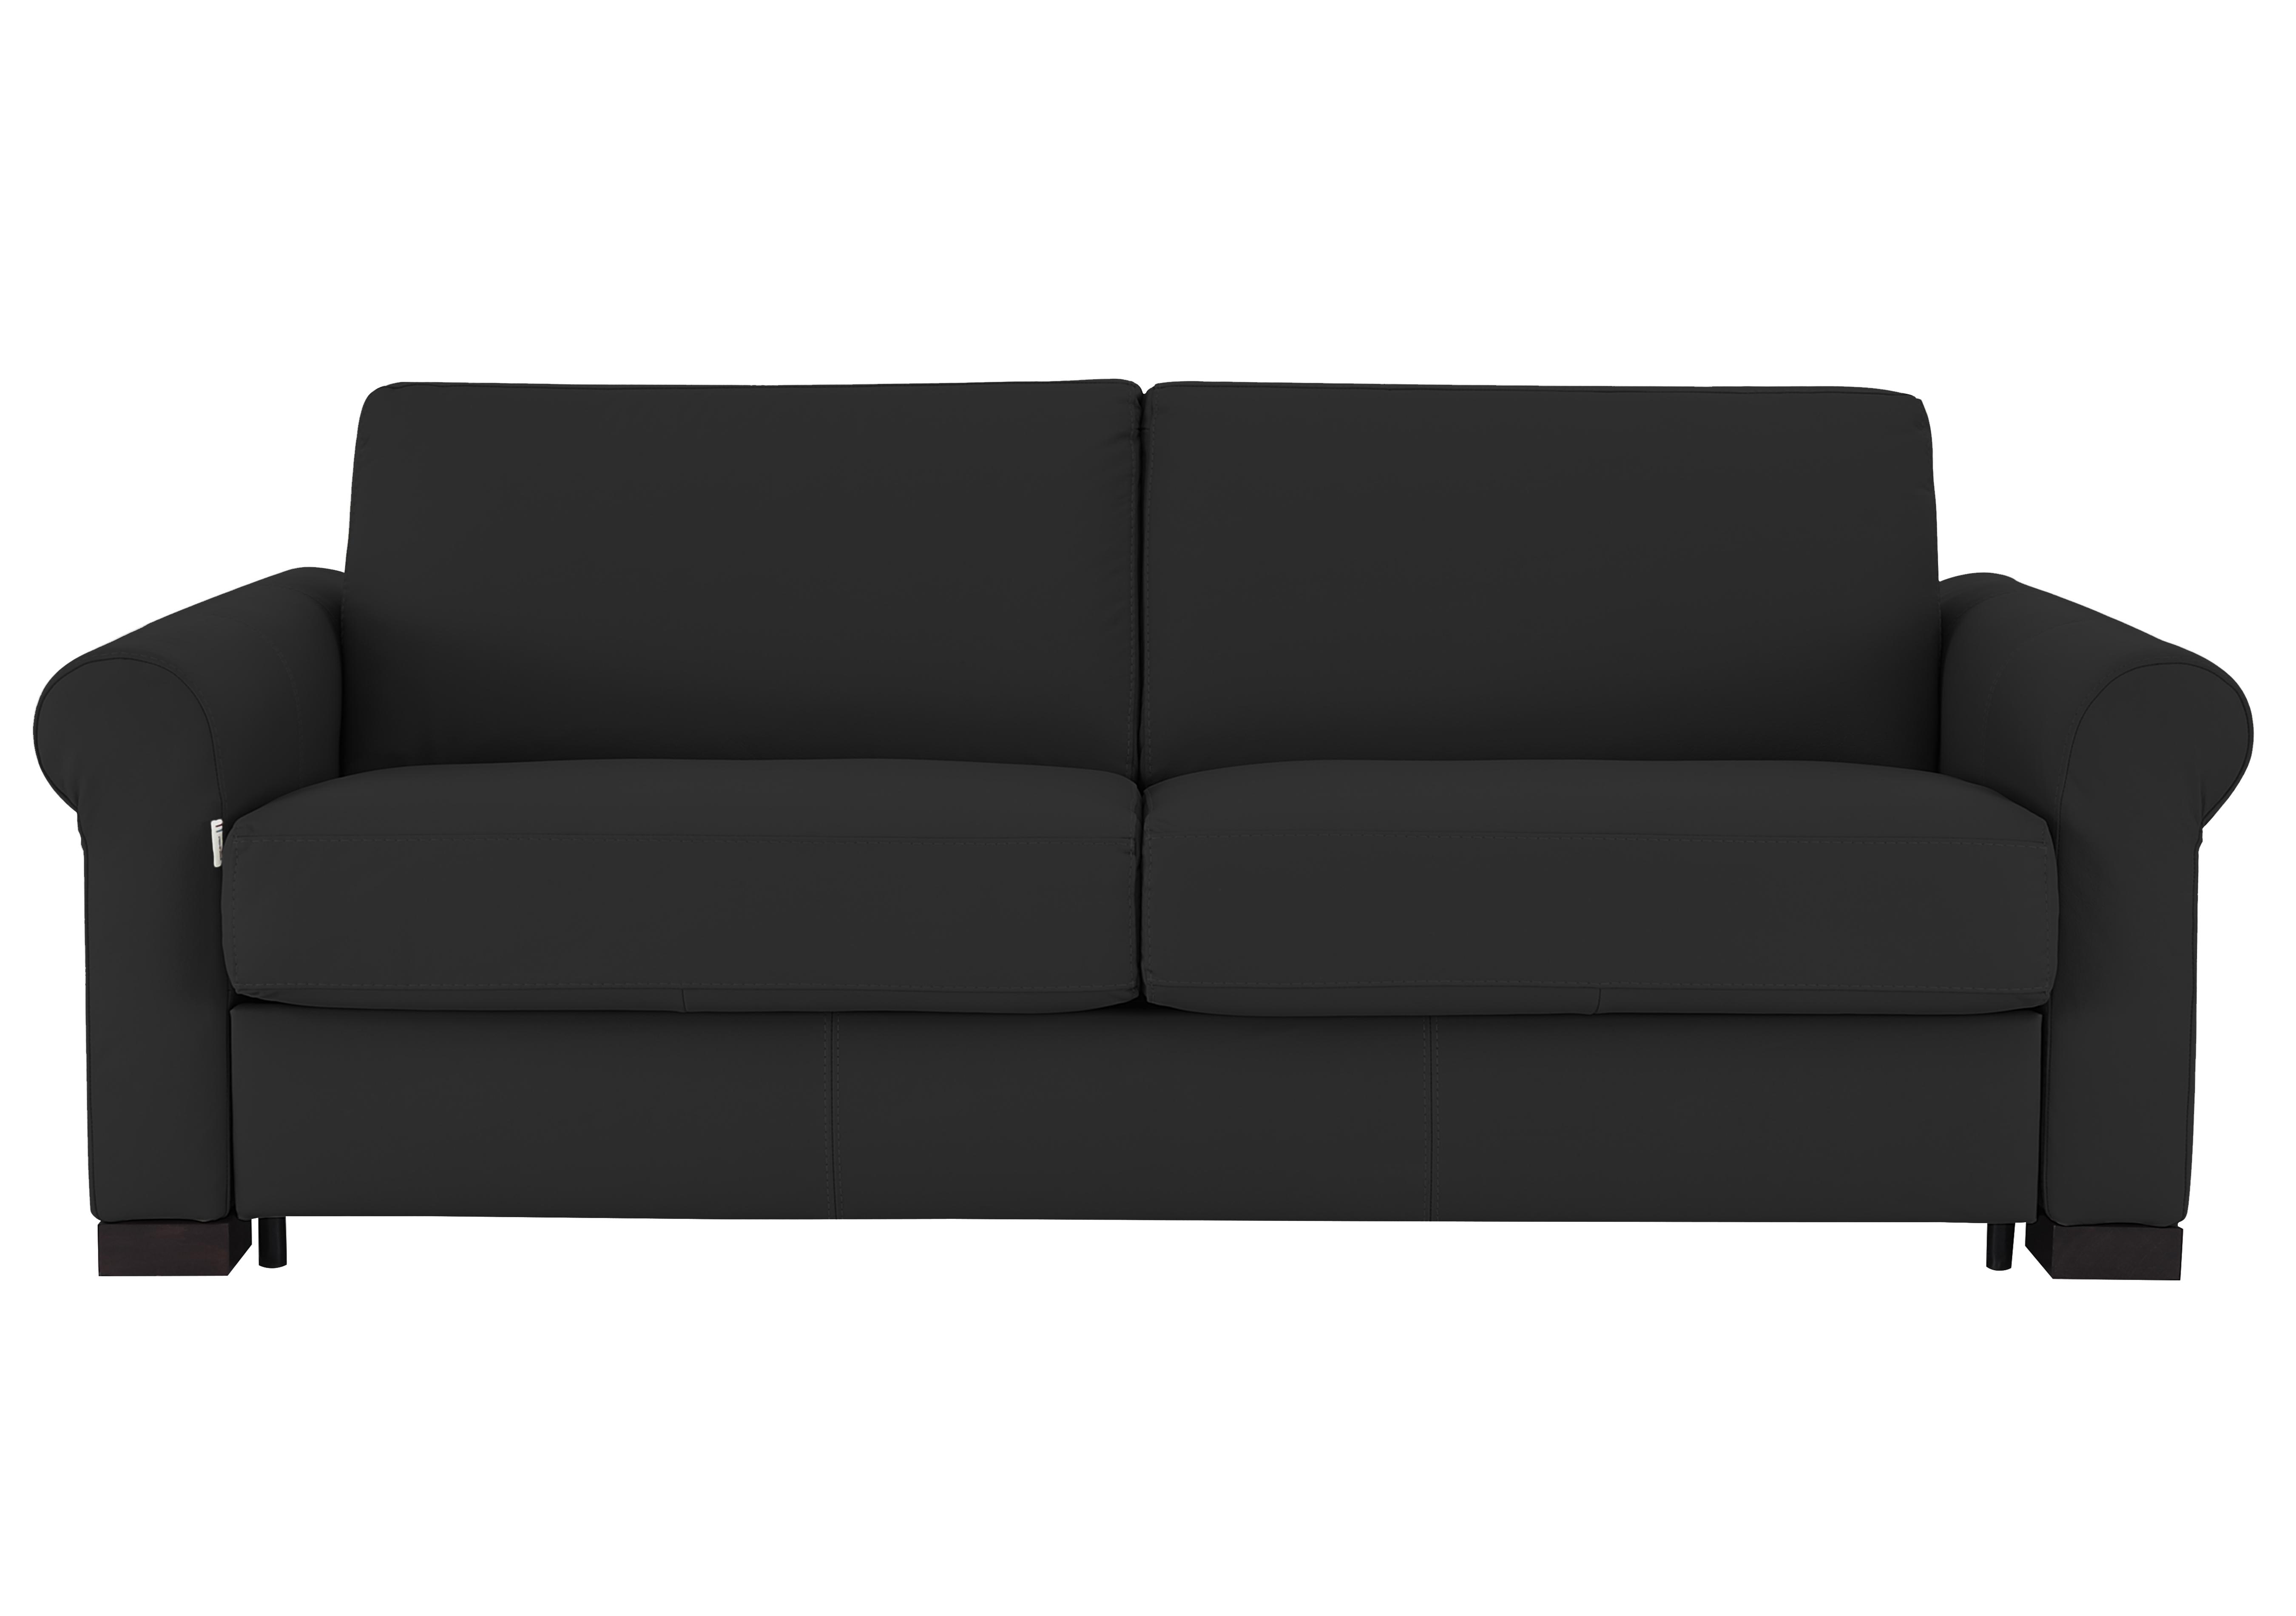 Alcova 3 Seater Leather Sofa Bed with Scroll Arms in Torello Nero 71 on Furniture Village